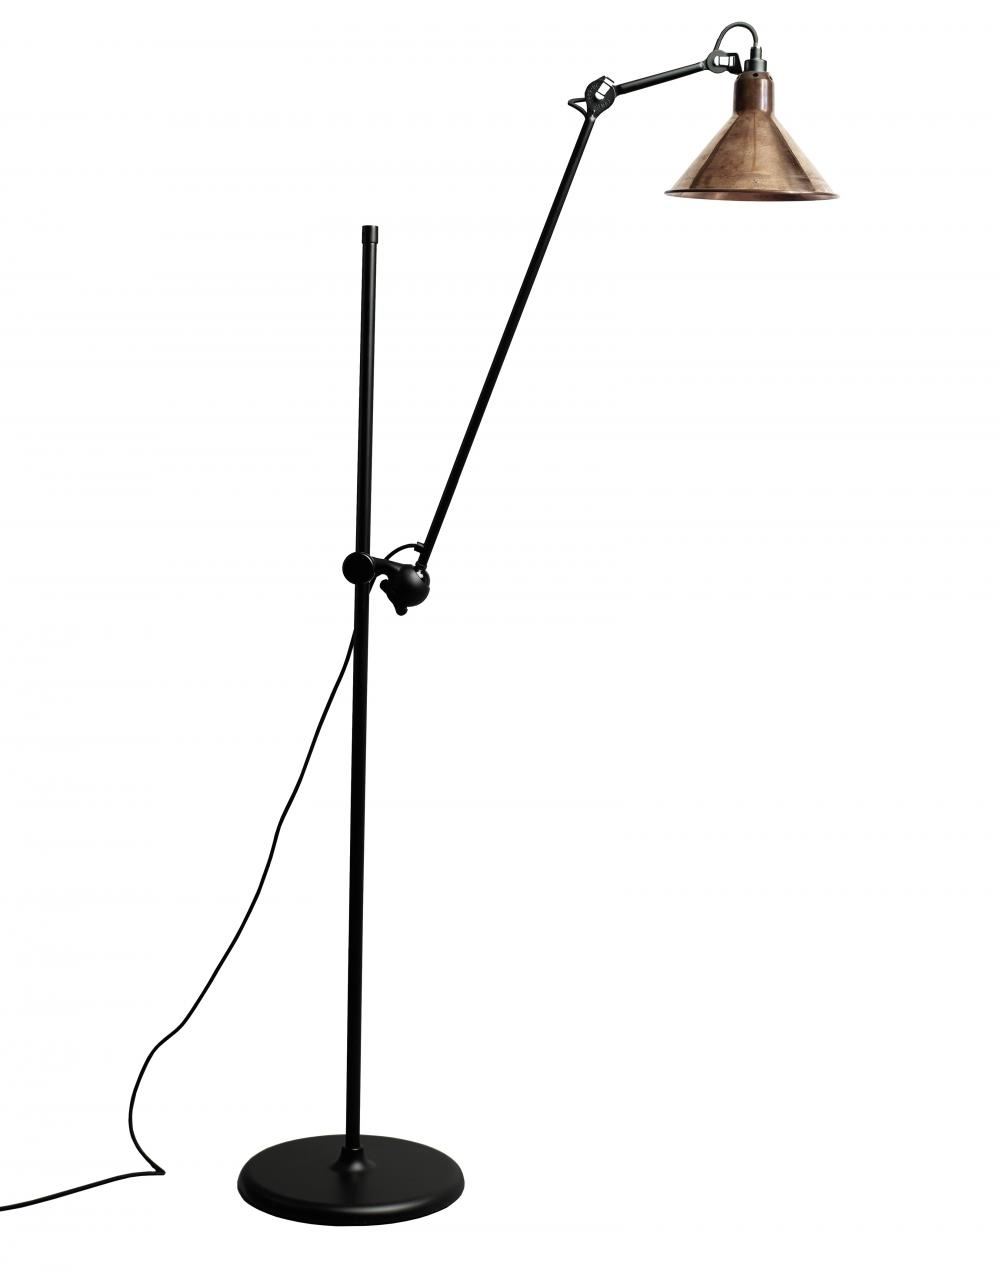 Lampe Gras 215 Floor Lamp Raw Copper Shade Black Body Conical Shade